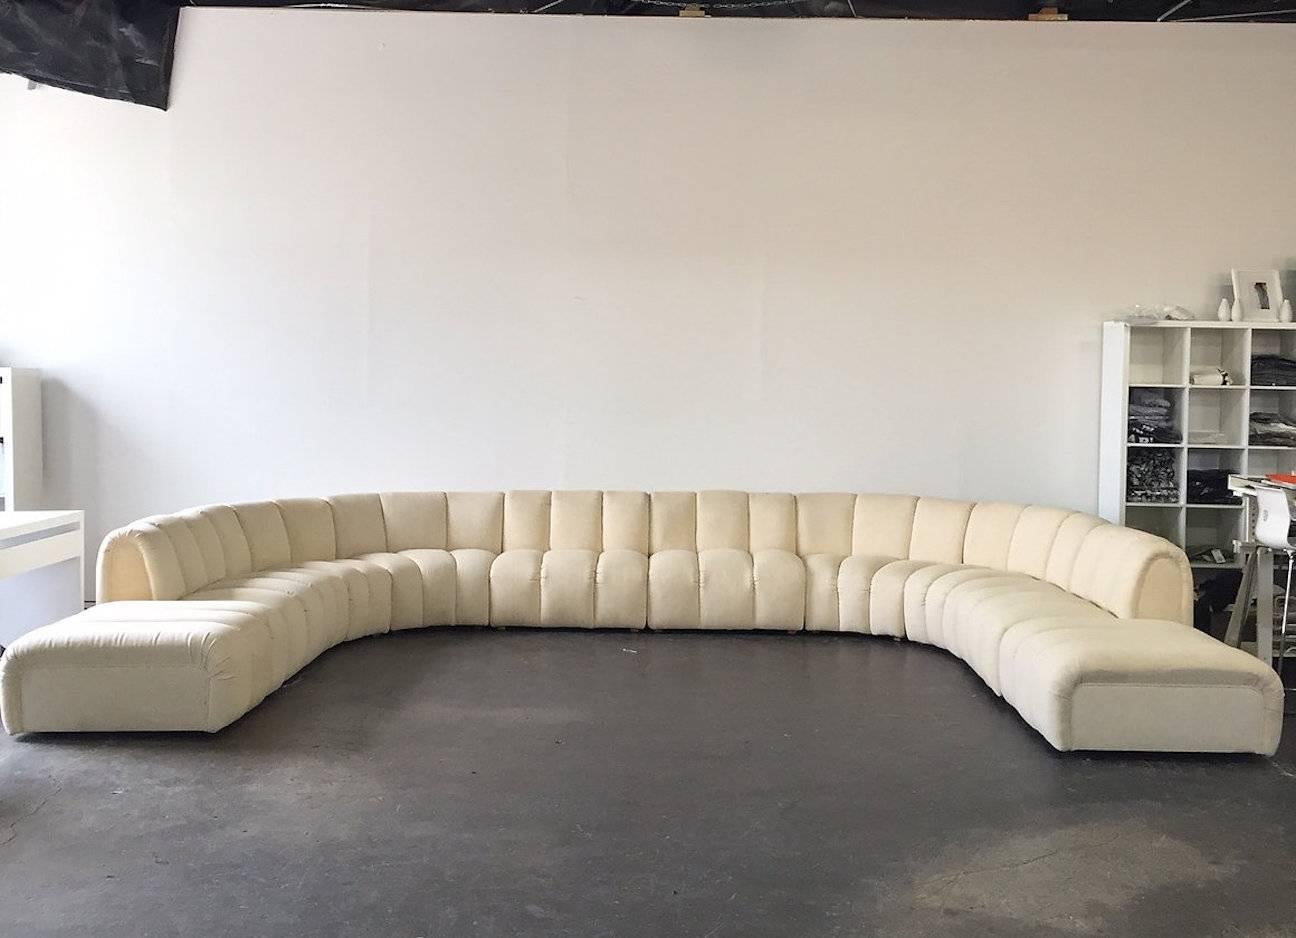 Ten-piece monumental channel back modular sofa. Upholstery is in good vintage condition with no visible tears but does show its age and new upholstery is needed, circa 1970s.

Dimensions: 205